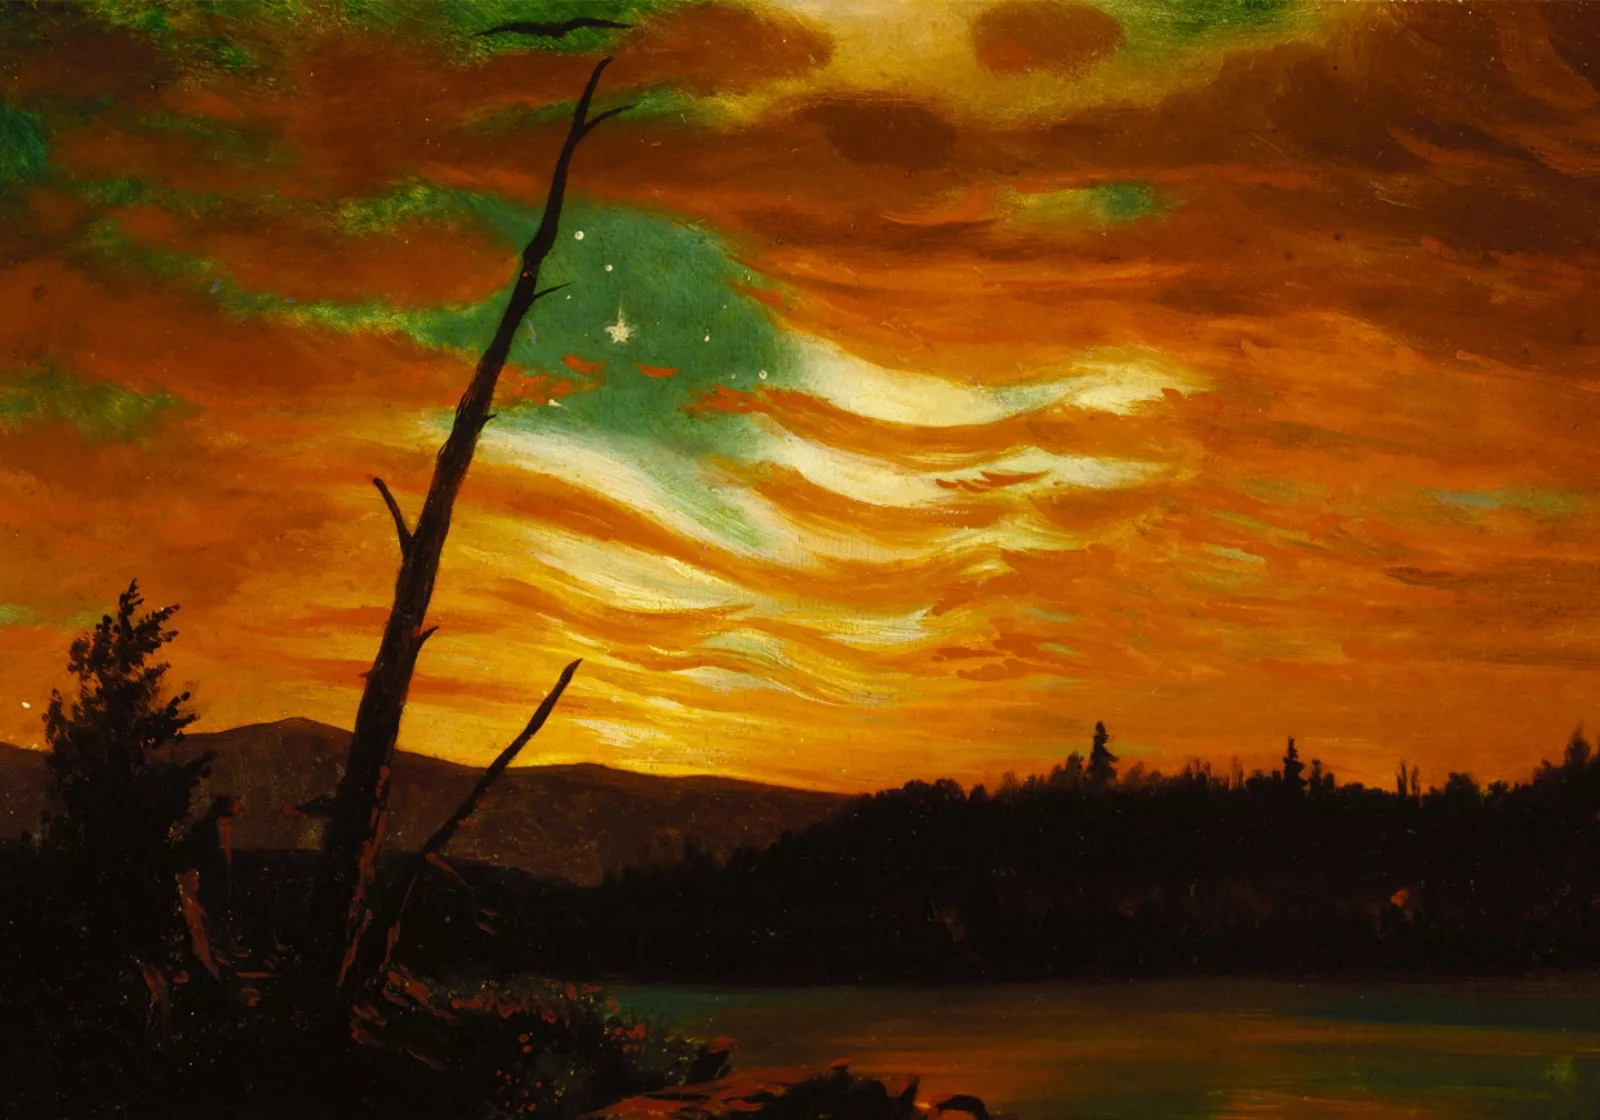 Frederic Edwin Church, Our Banner in the Sky, 1861. Terra Foundation for American Art, Daniel J. Terra Collection.